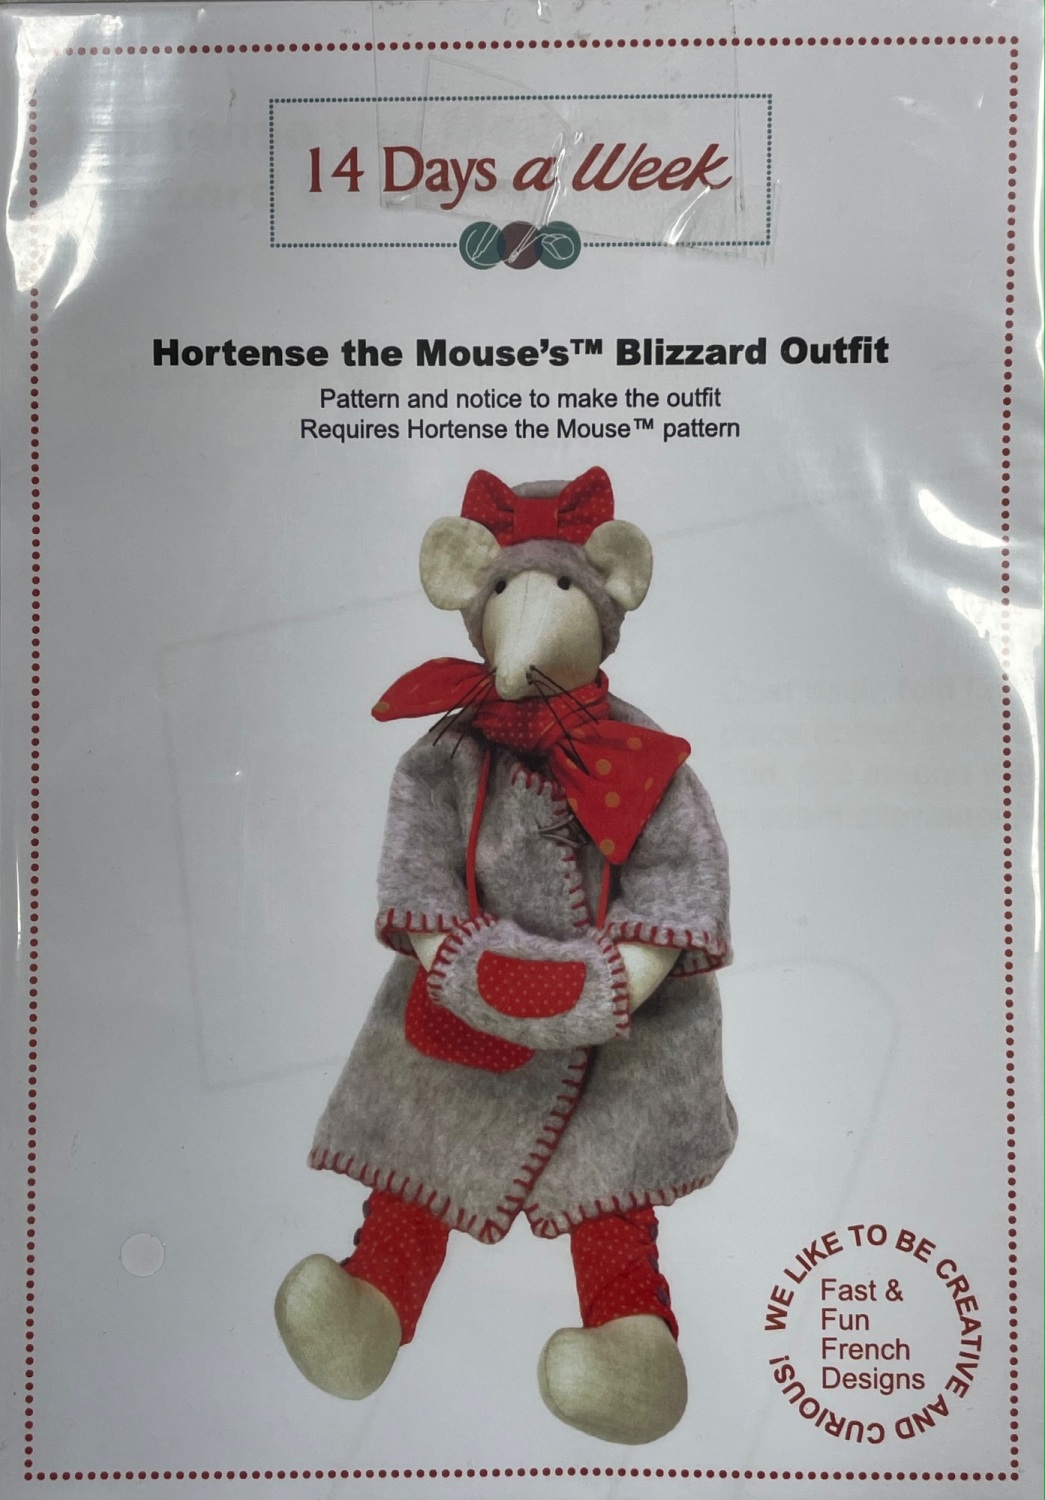 Hortense the Mouse Blizzard Outfit - HM002 - *PATTERN IS FOR THE OUTFIT ONL